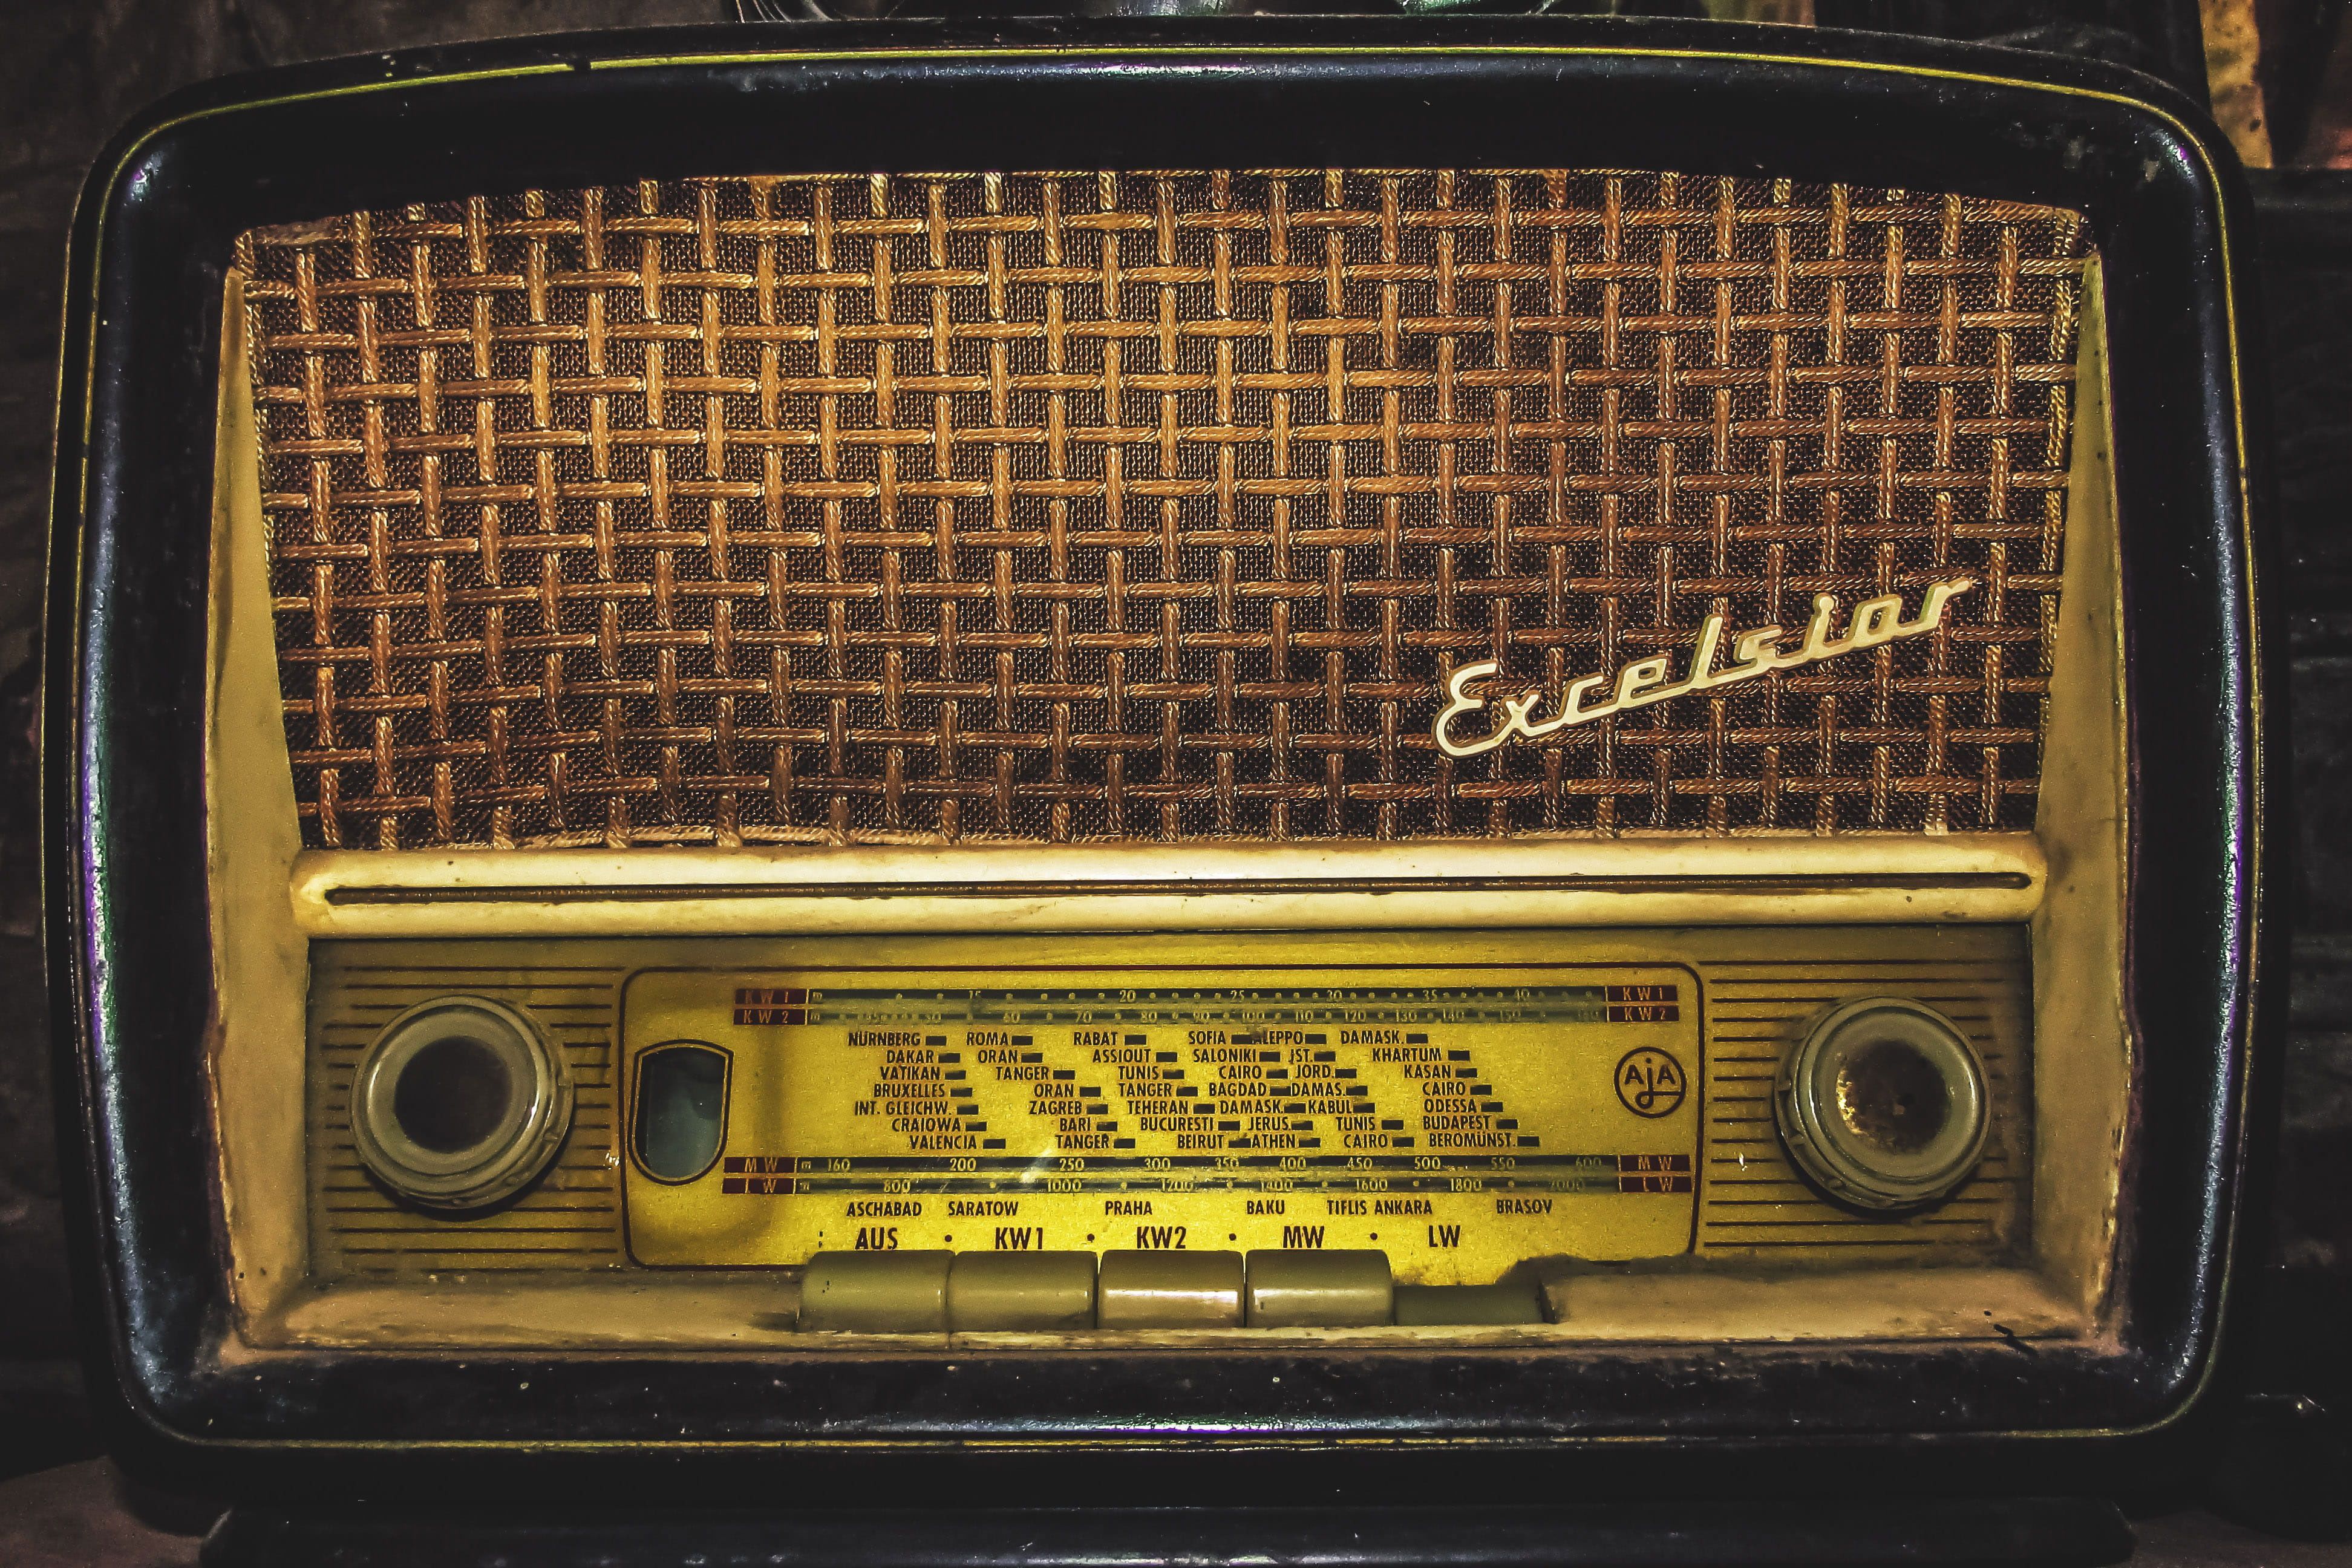 An Old Retro Vintage Radio Wallpaper, Technology, Music, Retro Styled, Old Fashioned. Vintage Wallpaper, Vintage Radio, Wallpaper Vintage